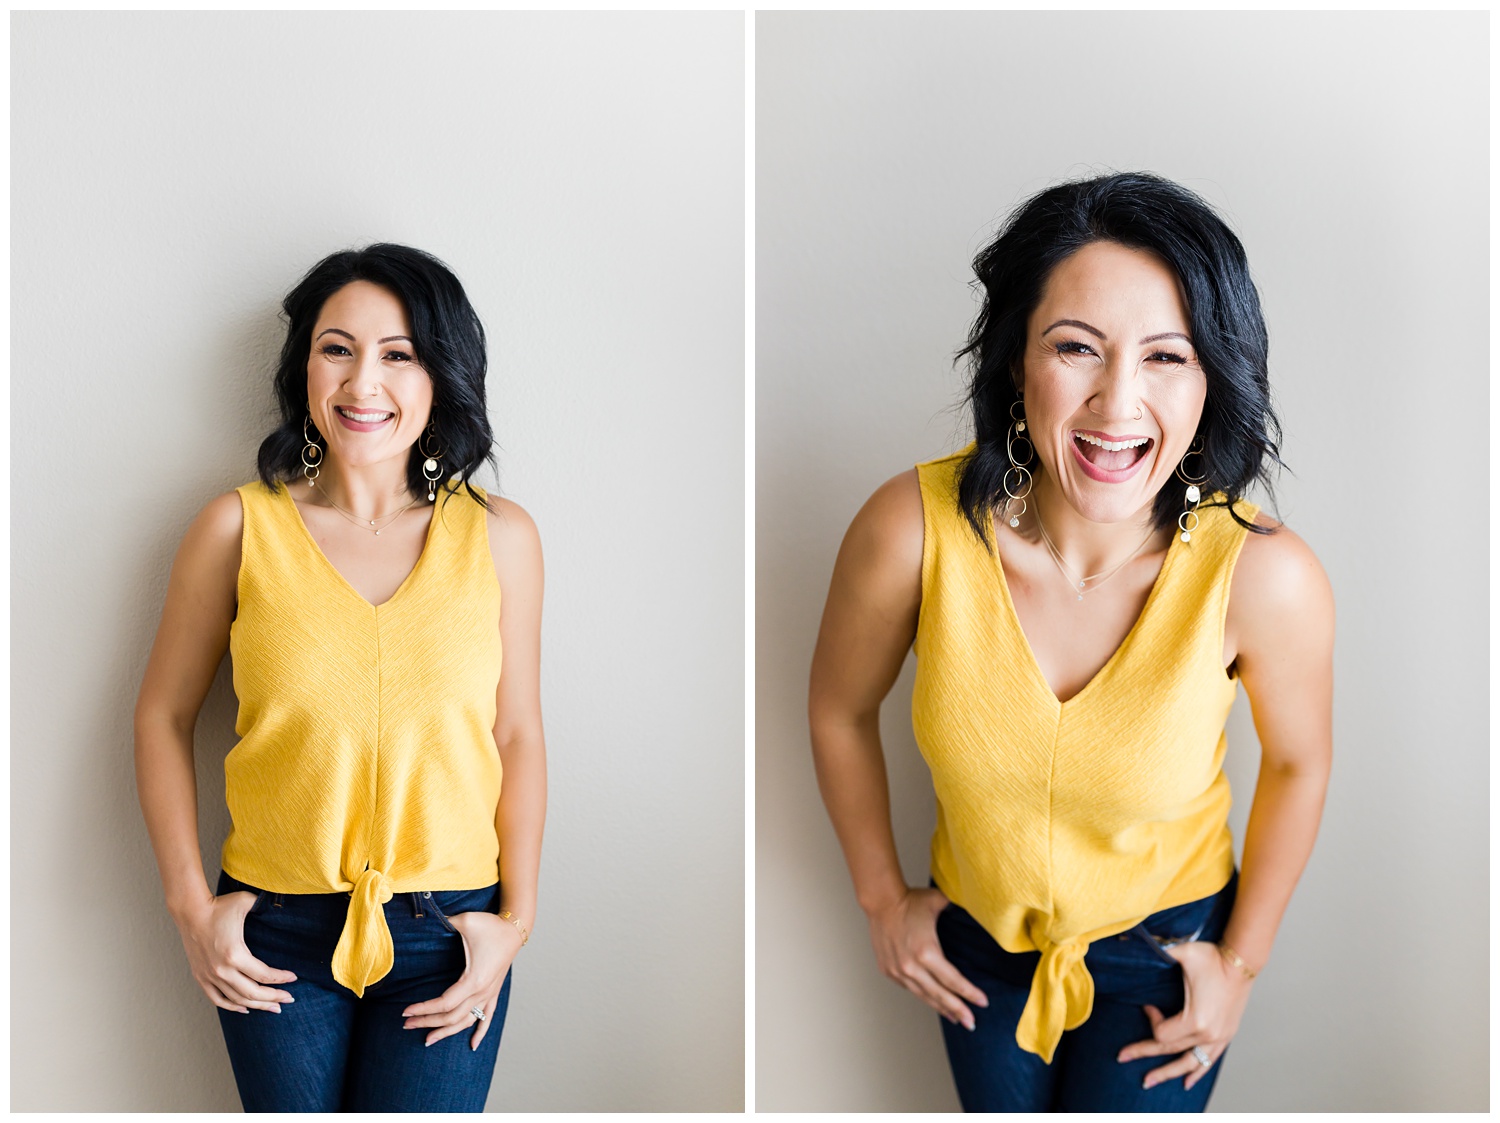 Life Coach | Orange County Branding Session by Southern California Brand Photographer Jackie Ceja